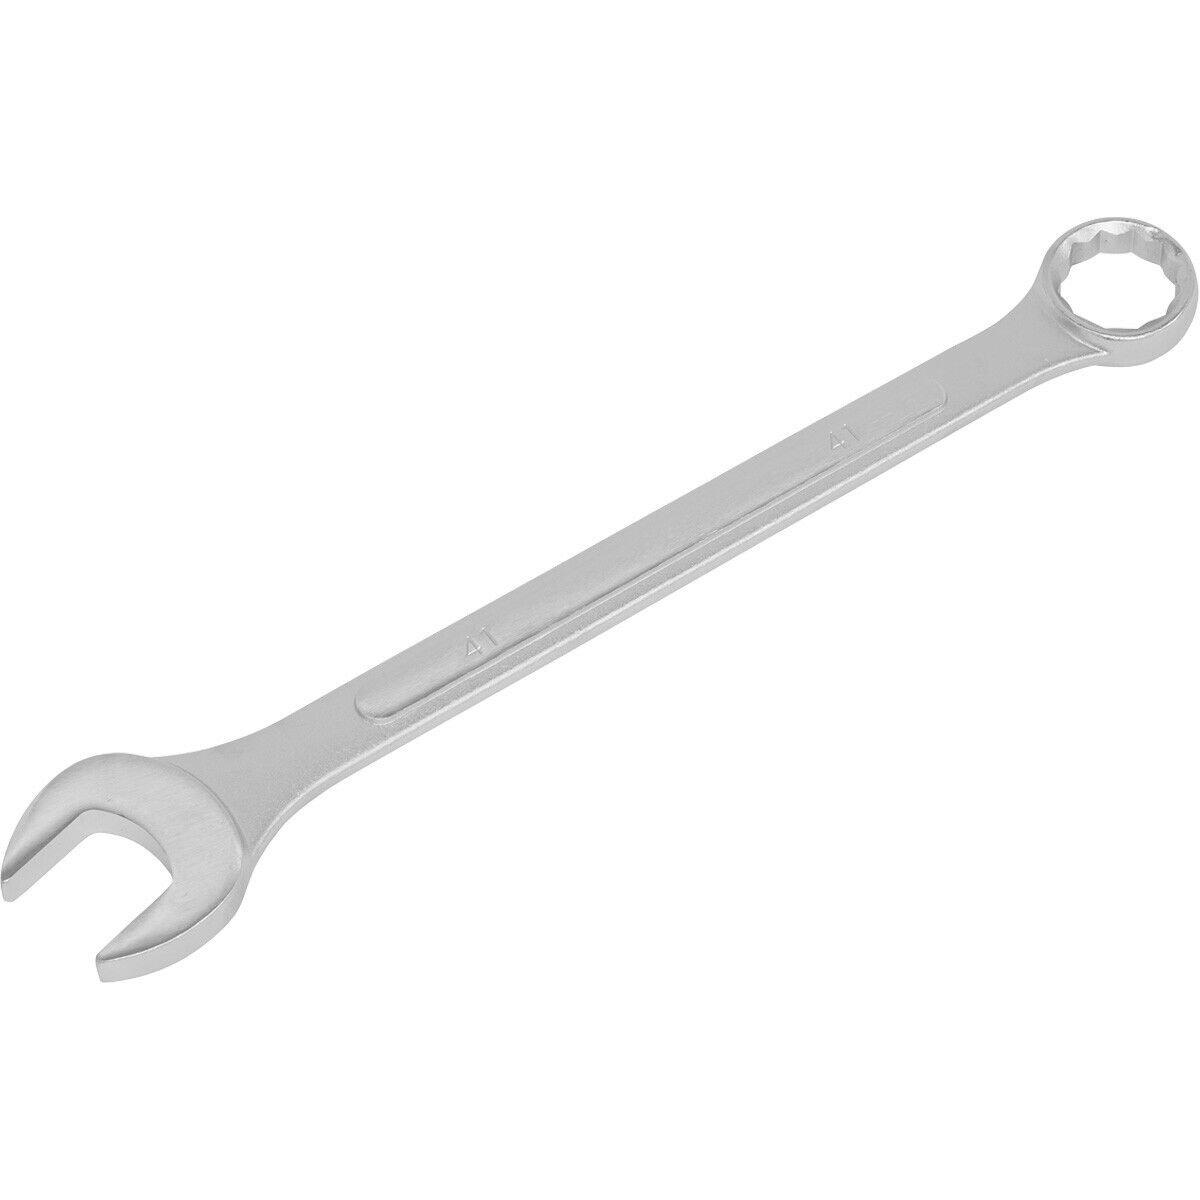 41mm Large Combination Spanner - Drop Forged Steel - Chrome Plated Polished Jaws